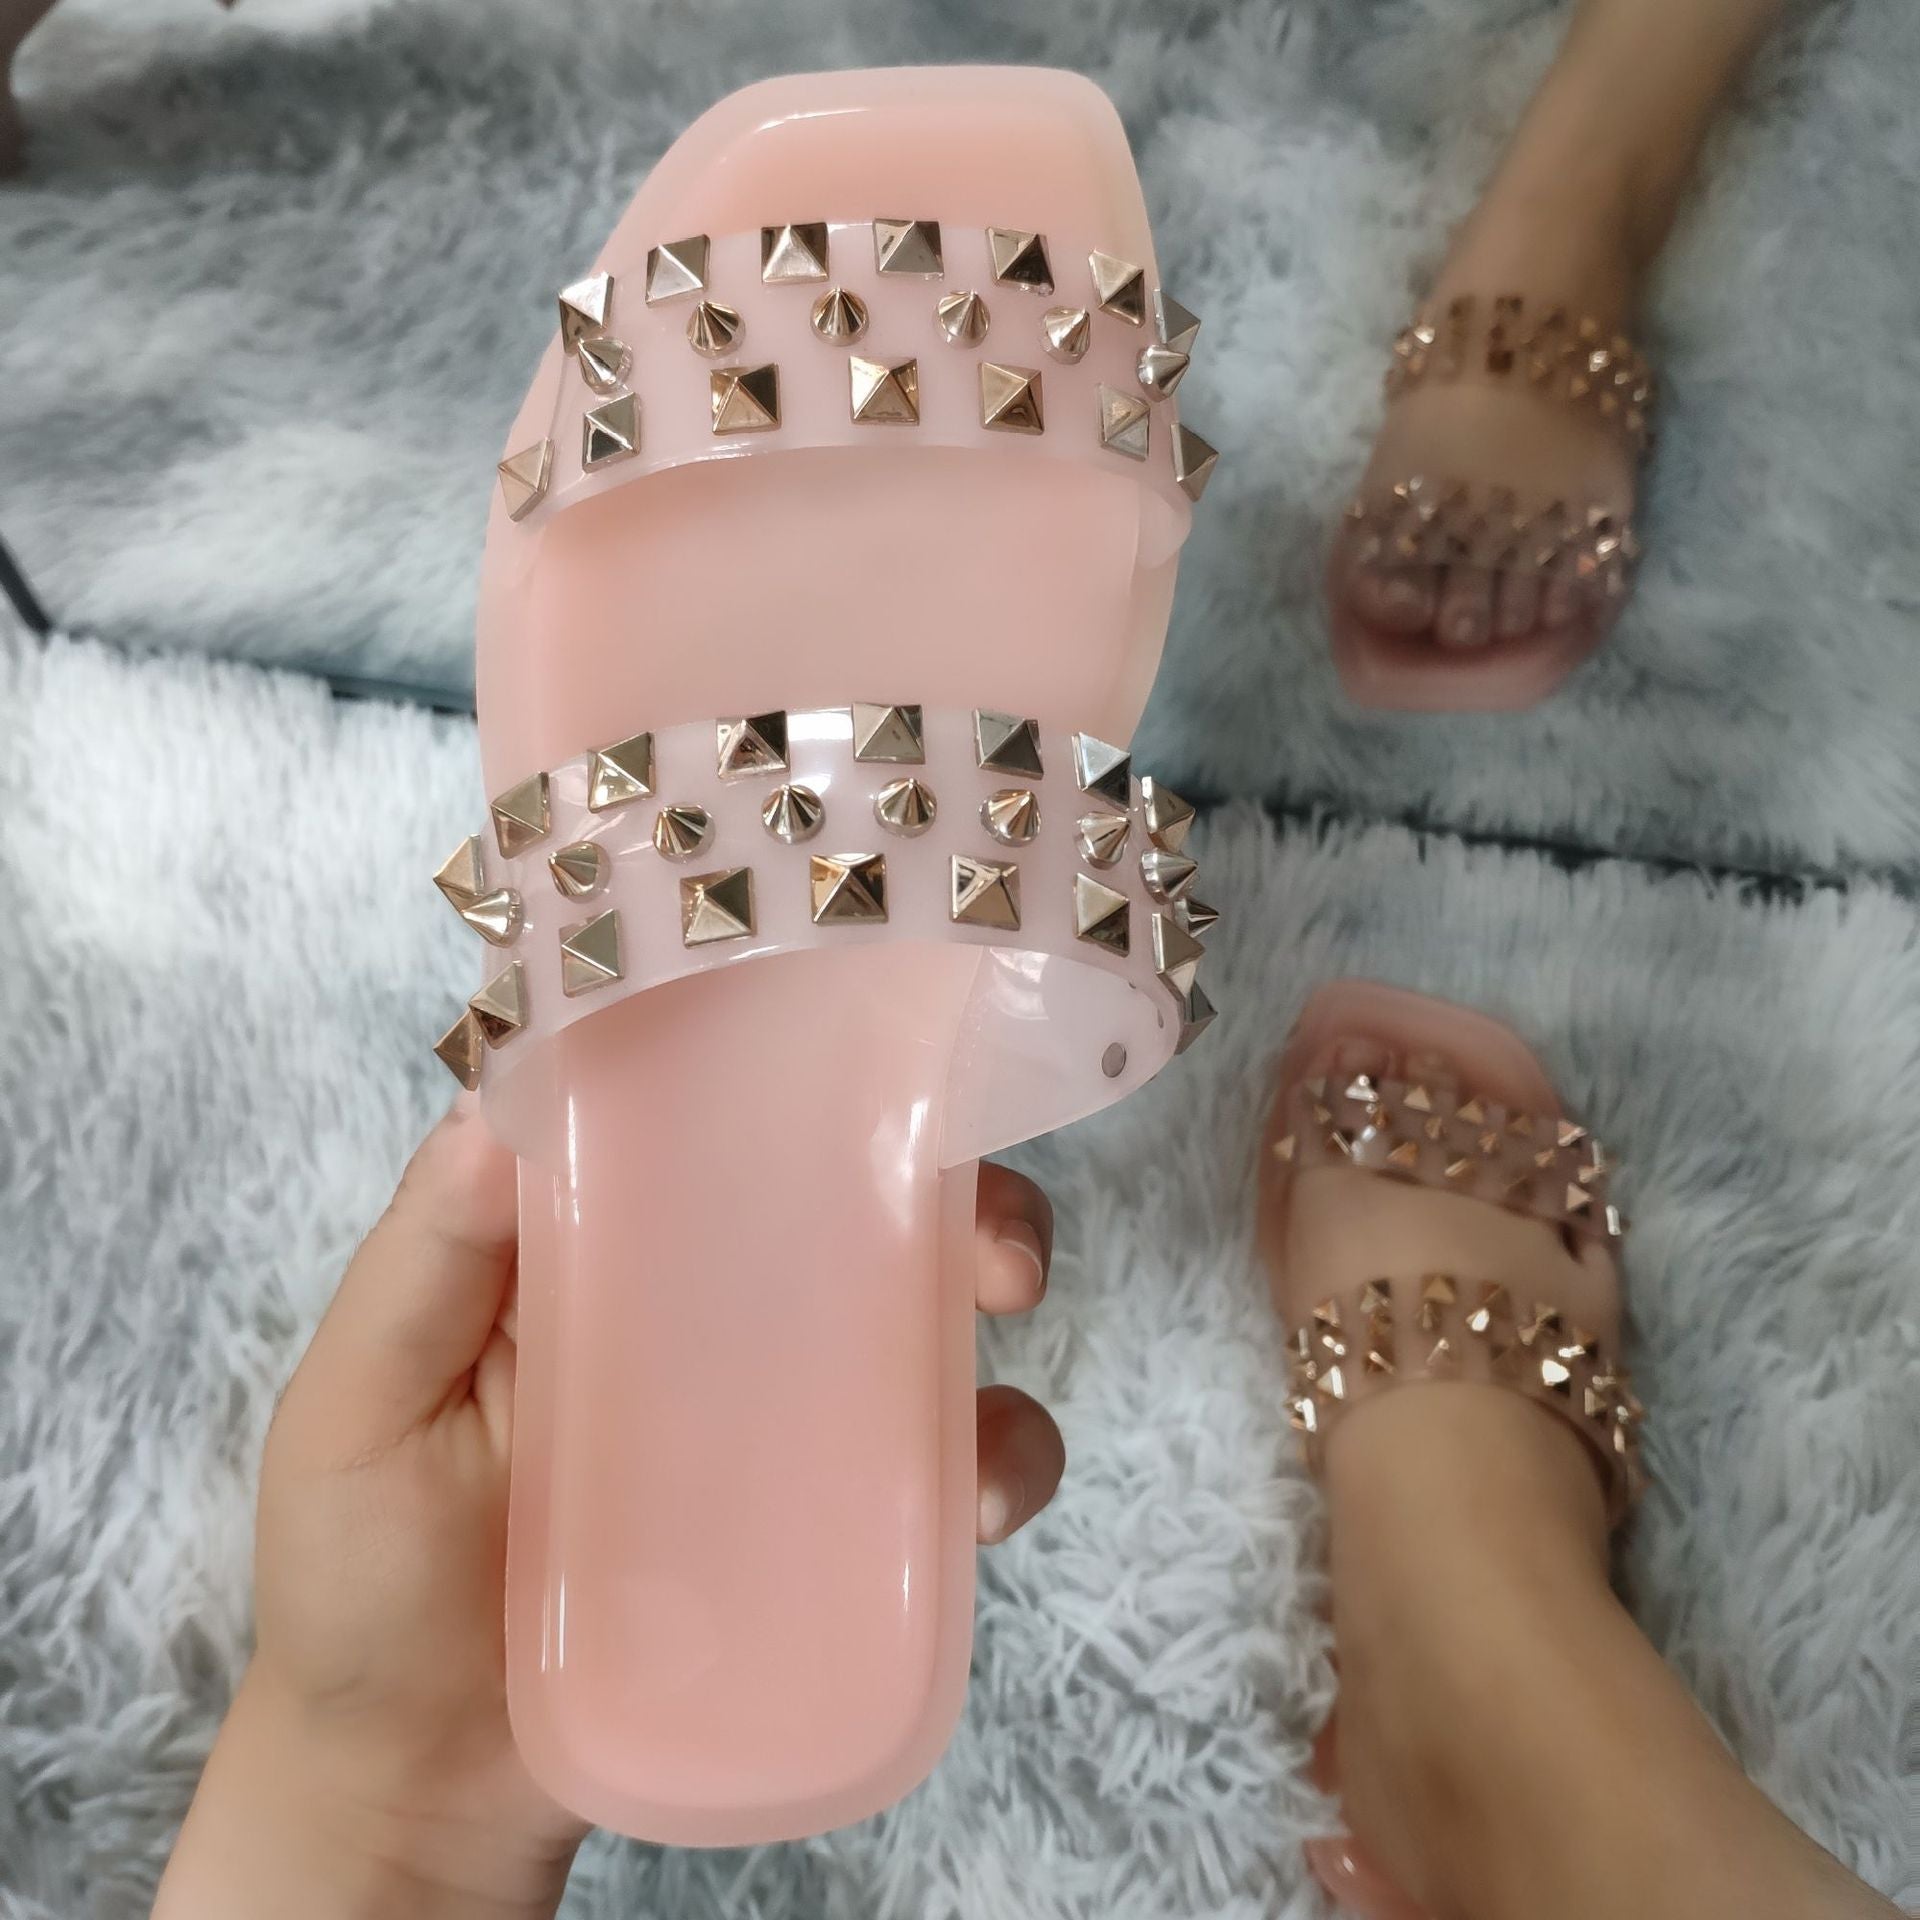 Women's 2 straps studded flat jelly slides | Crystal rivets summer outdoors slippers